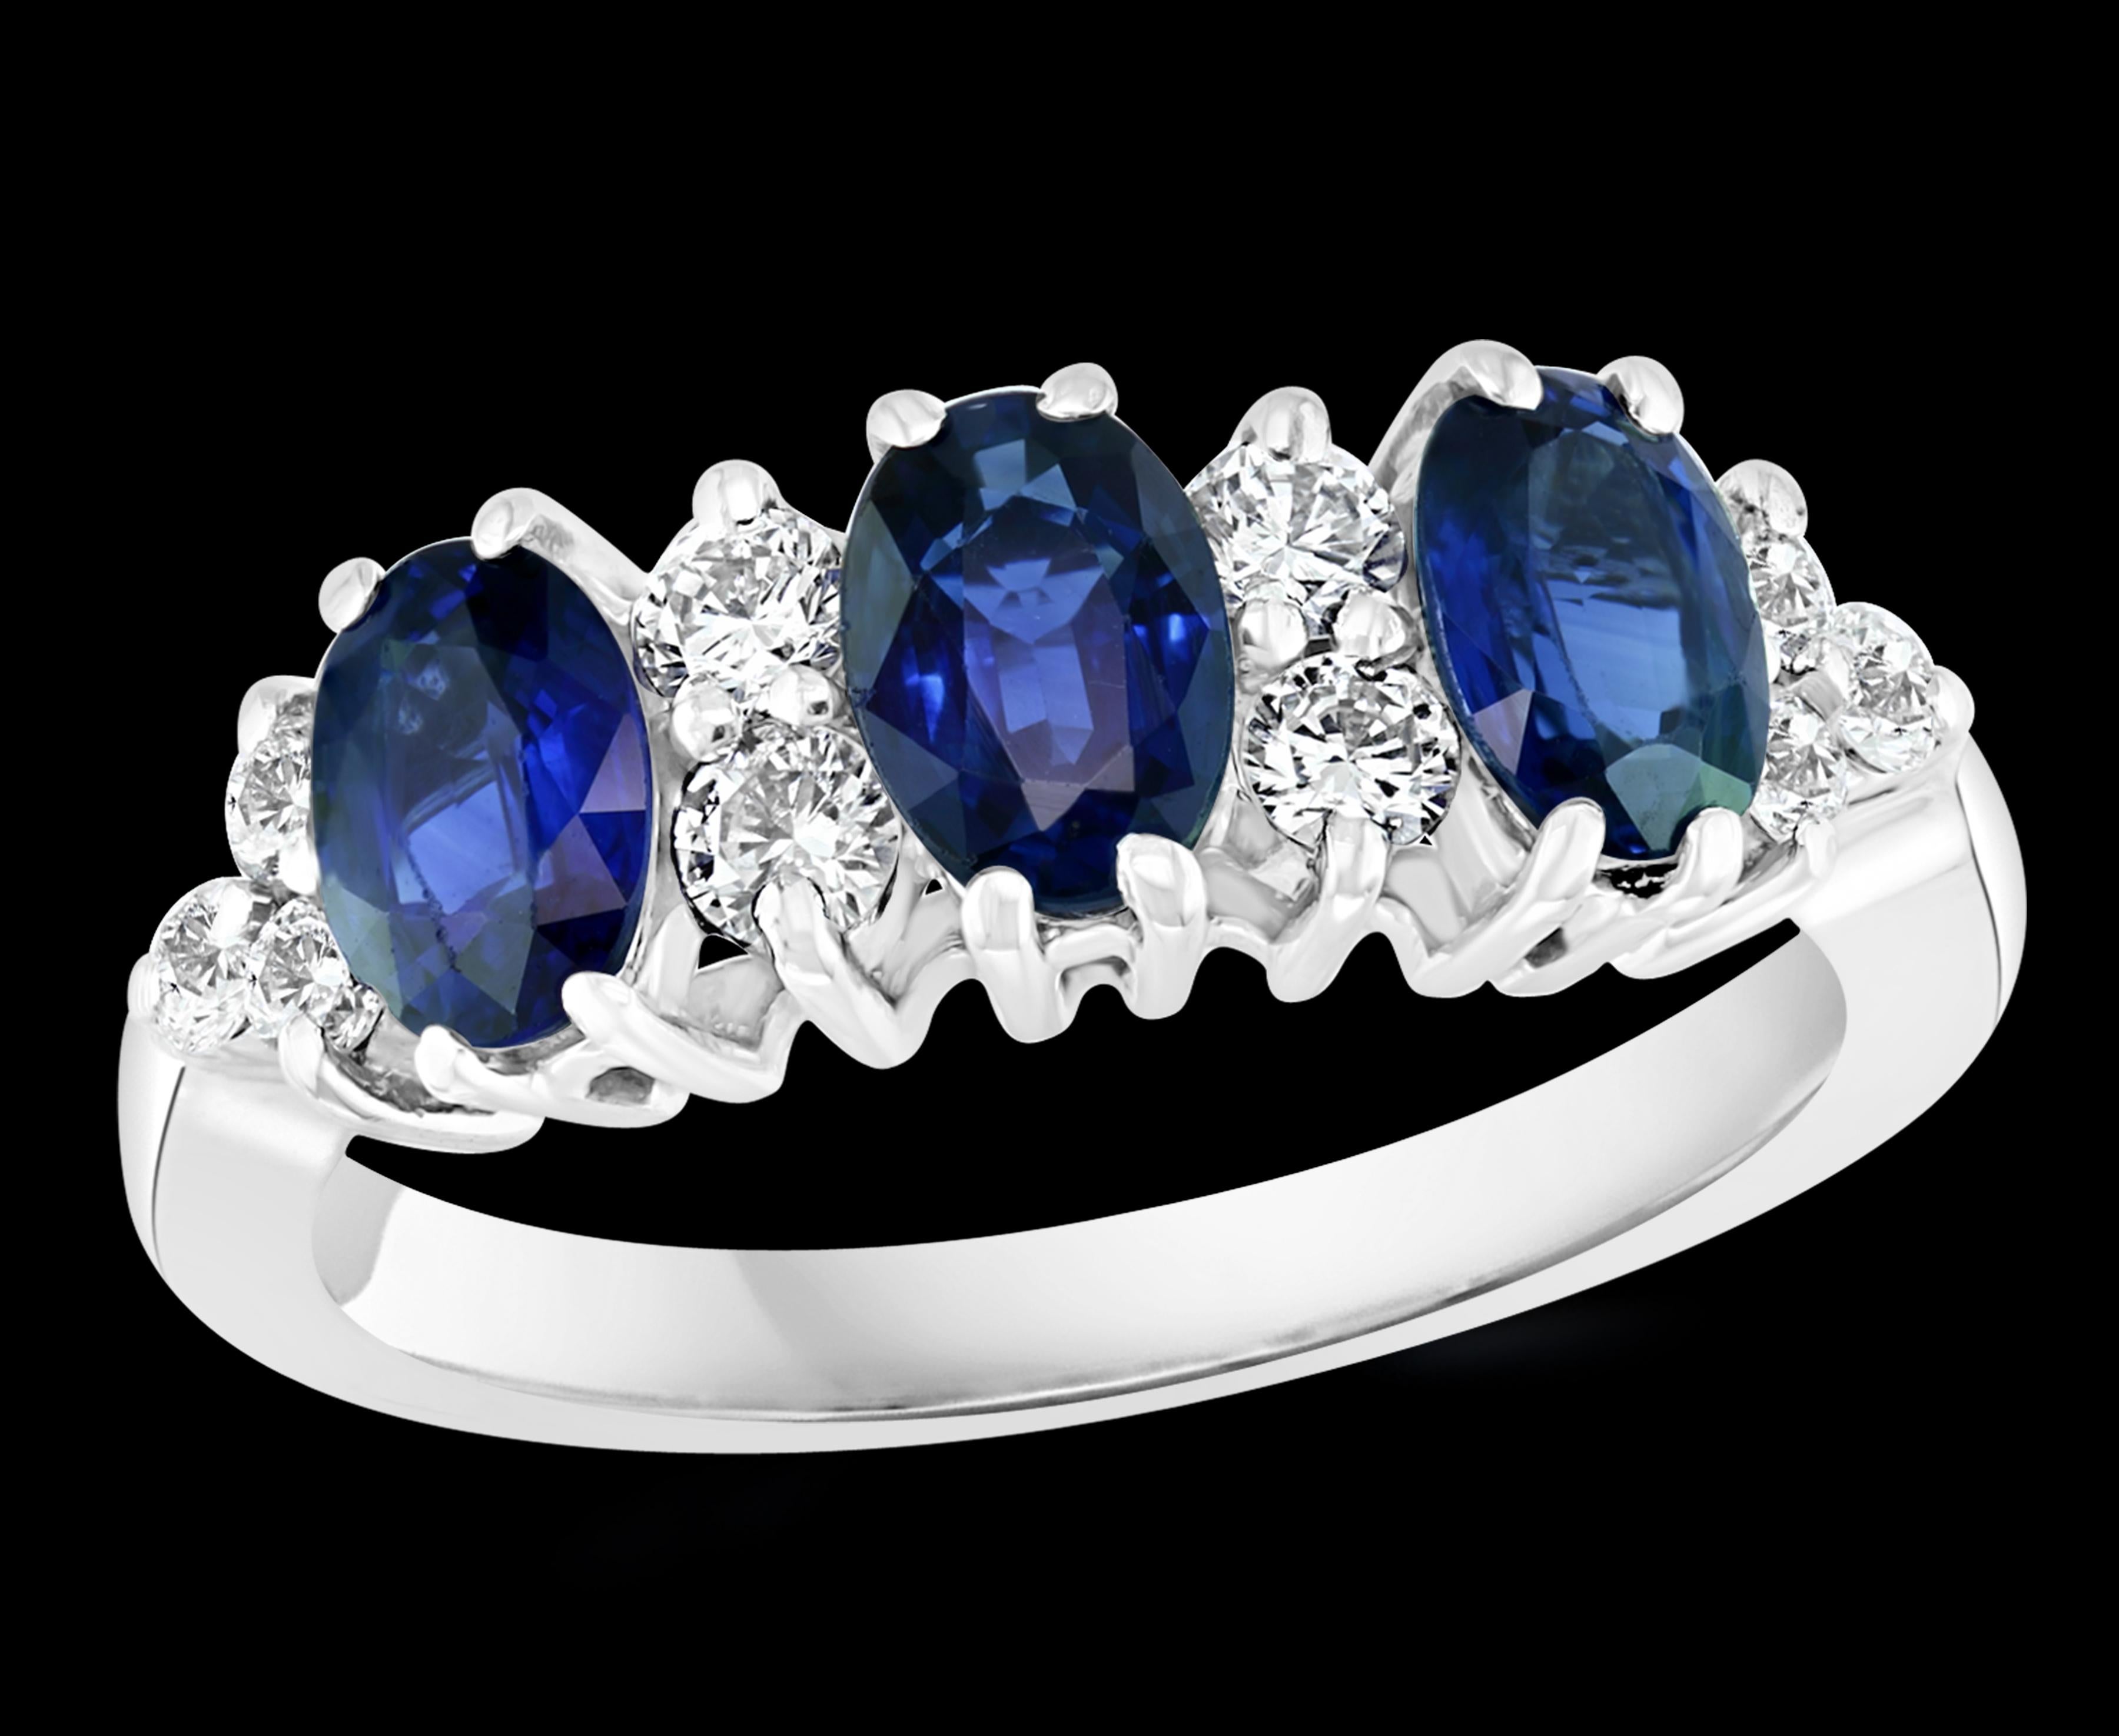 Approximately 2.5 Ct Blue Sapphire & 0.6 Ct Diamond Cocktail Ring in 18 Karat White Gold Estate
2.5 Carat of 3 Oval  blue Sapphire. This is an estate piece 
10 Round Brilliant cut diamond.    Total Diamond Weight of  brilliant  Round cut diamonds